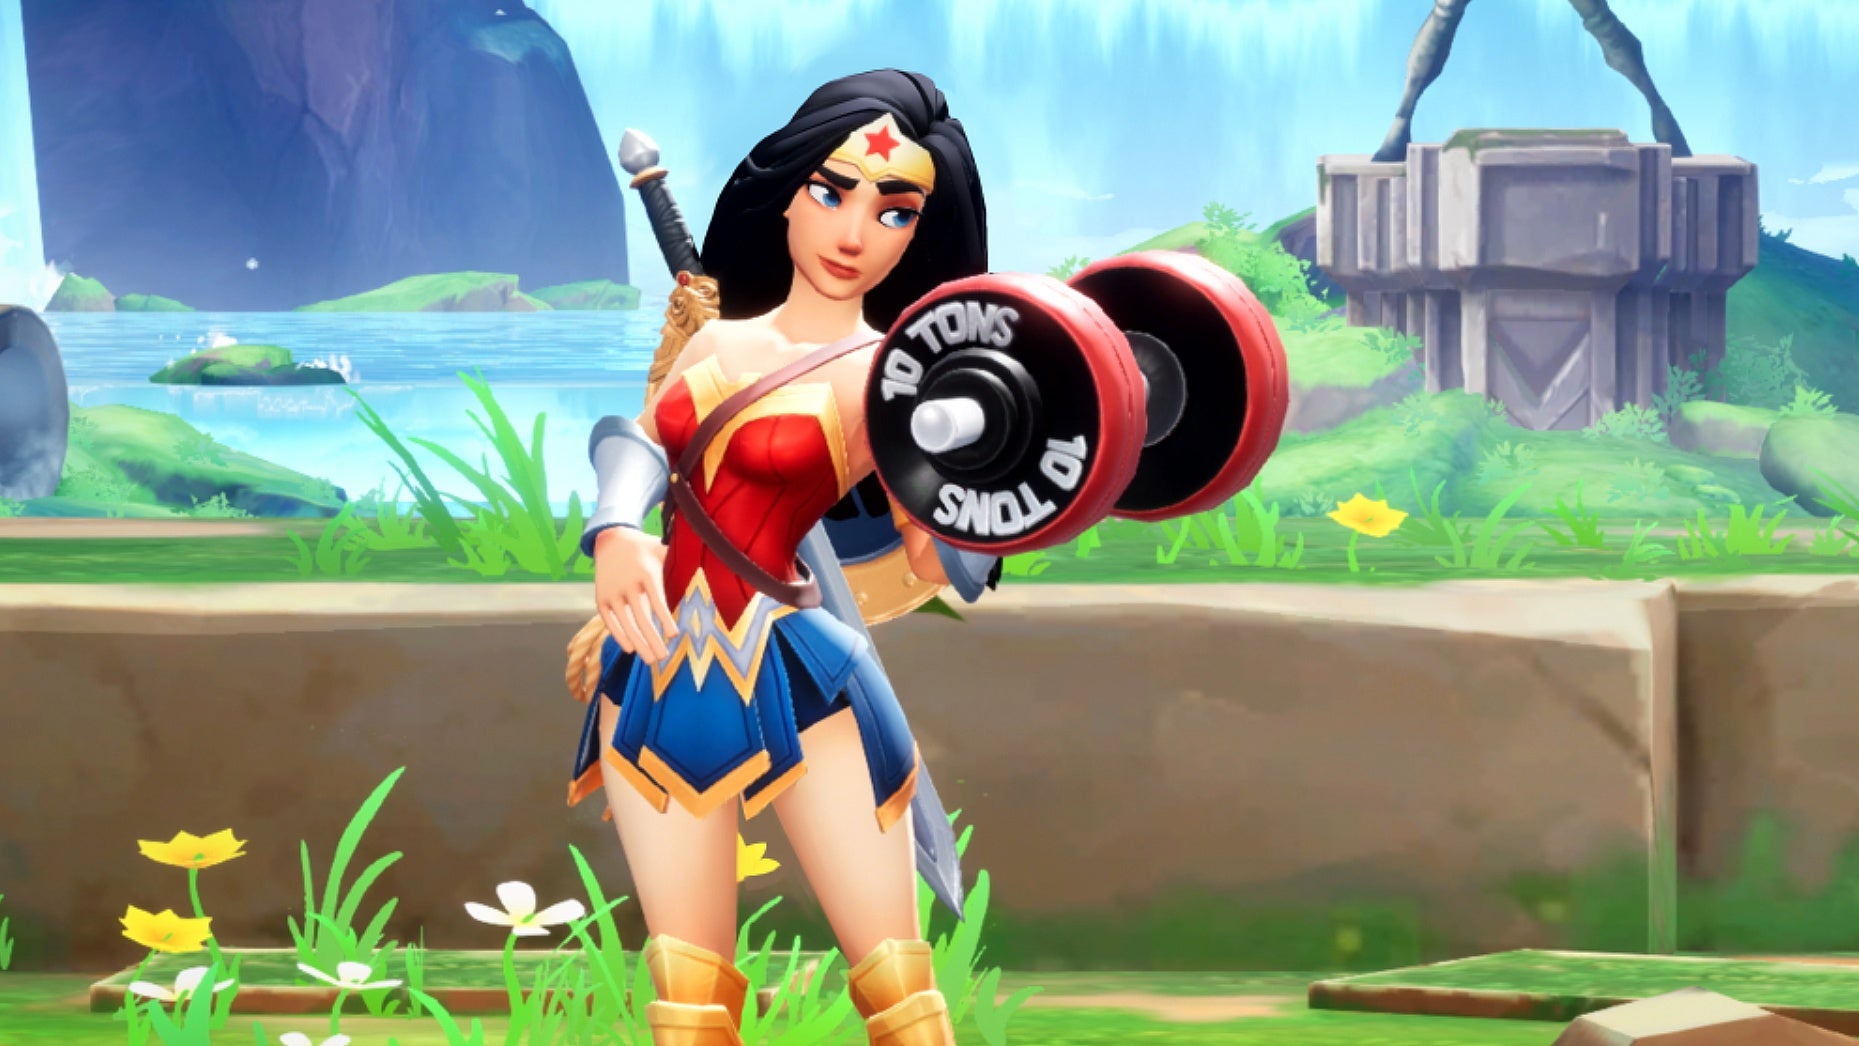 MultiVersus is a free-to-play brawler from Warner Bros. Interactive where you can fight as Shaggy from Scooby Doo against Superman.